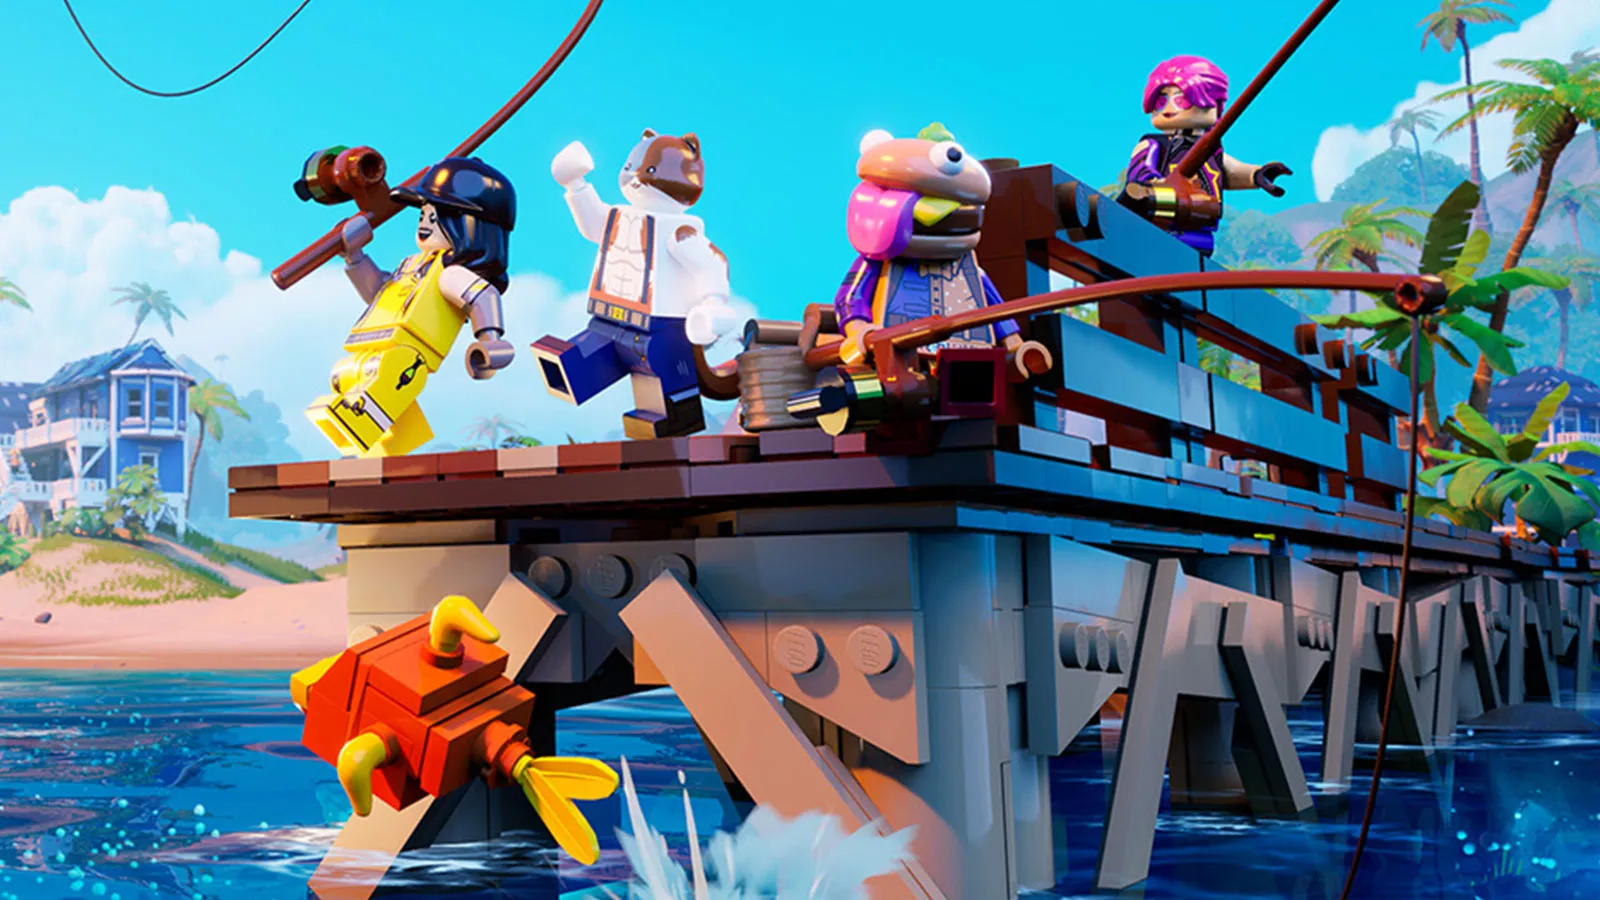 LEGO Fortnite 28.30 patch note: Fishing rod, compass, new styles…